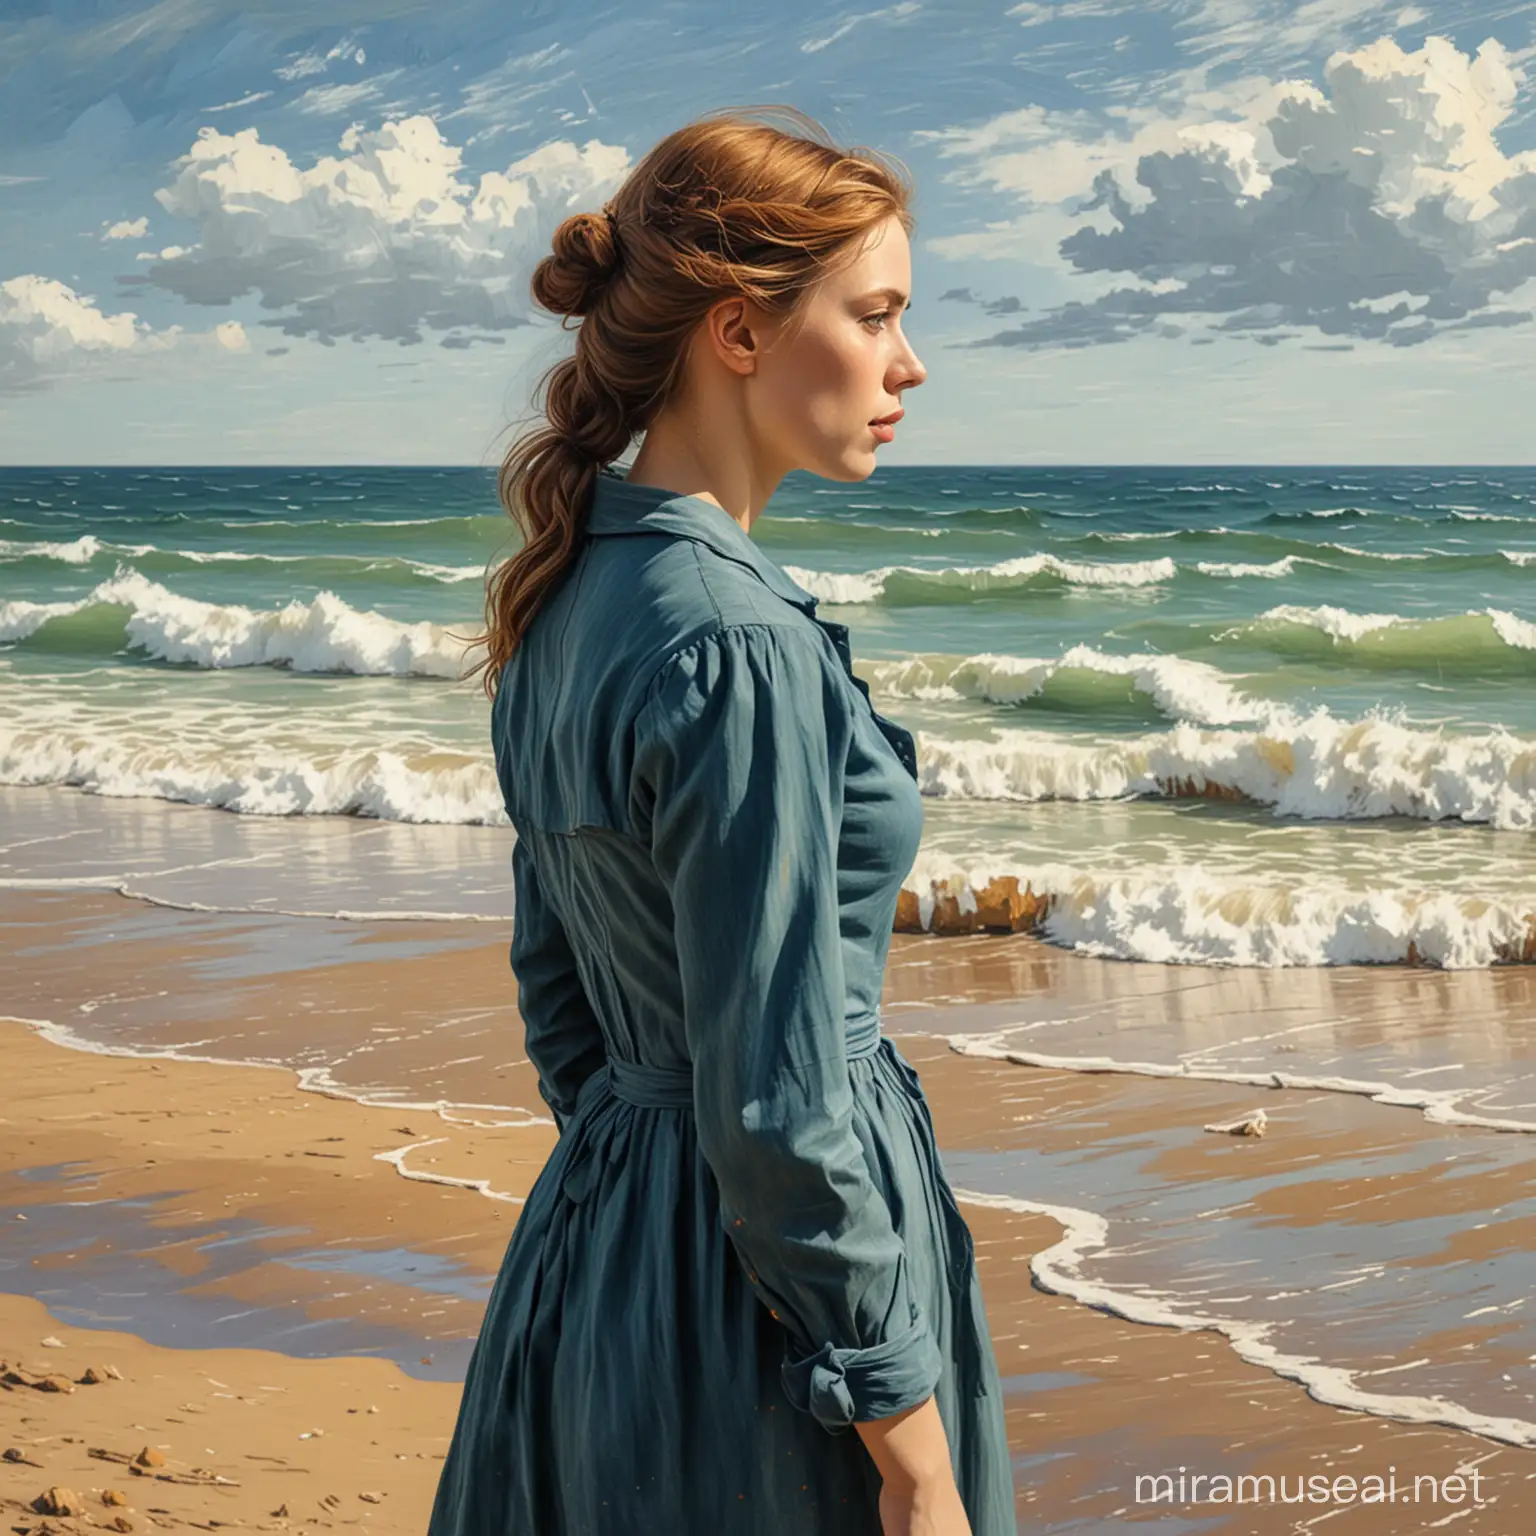 Wistful Young Woman on Beach Van Gogh Style Painting